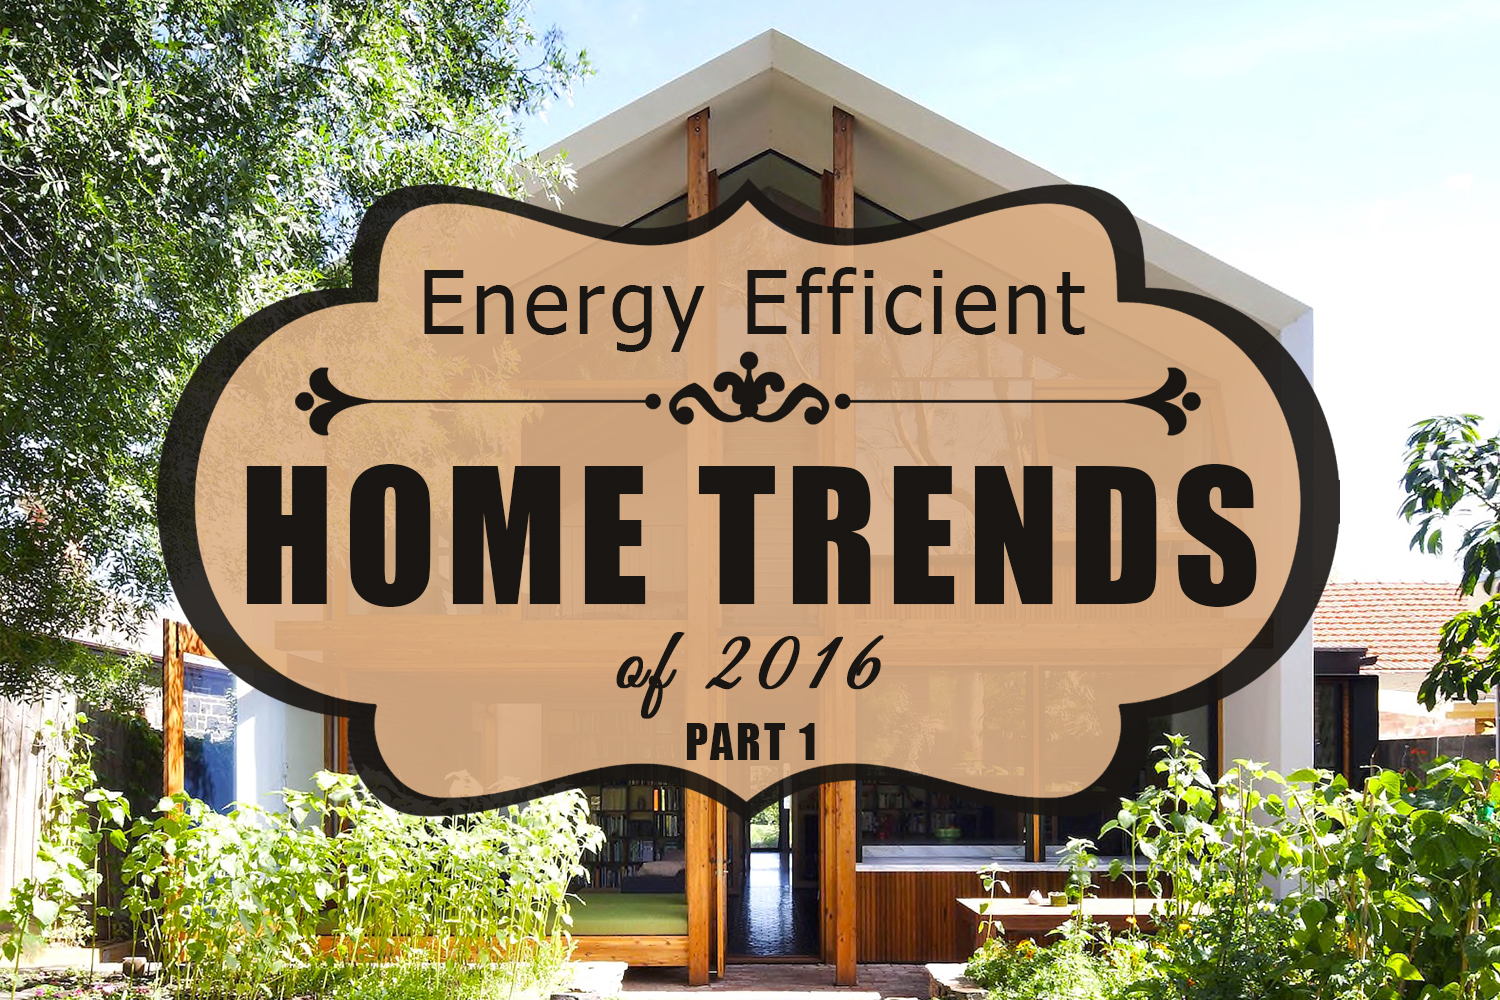 [PART 1] Energy Efficient Home Trends of 2016